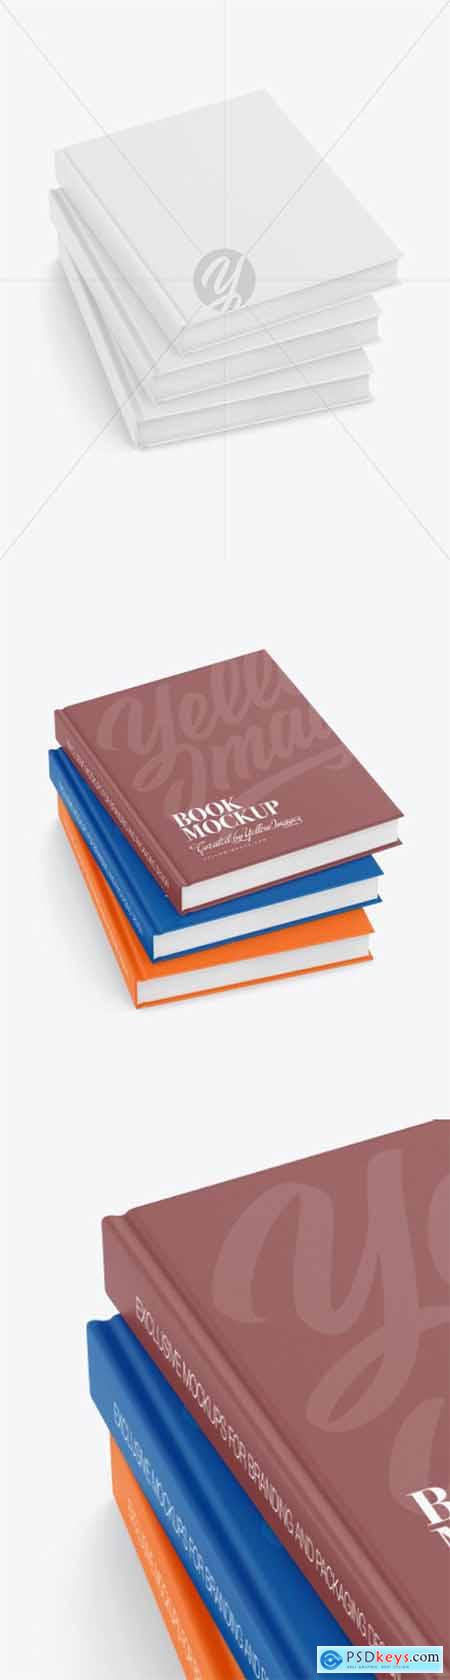 Hardcover Books w- Textured Cover Mockup 65106